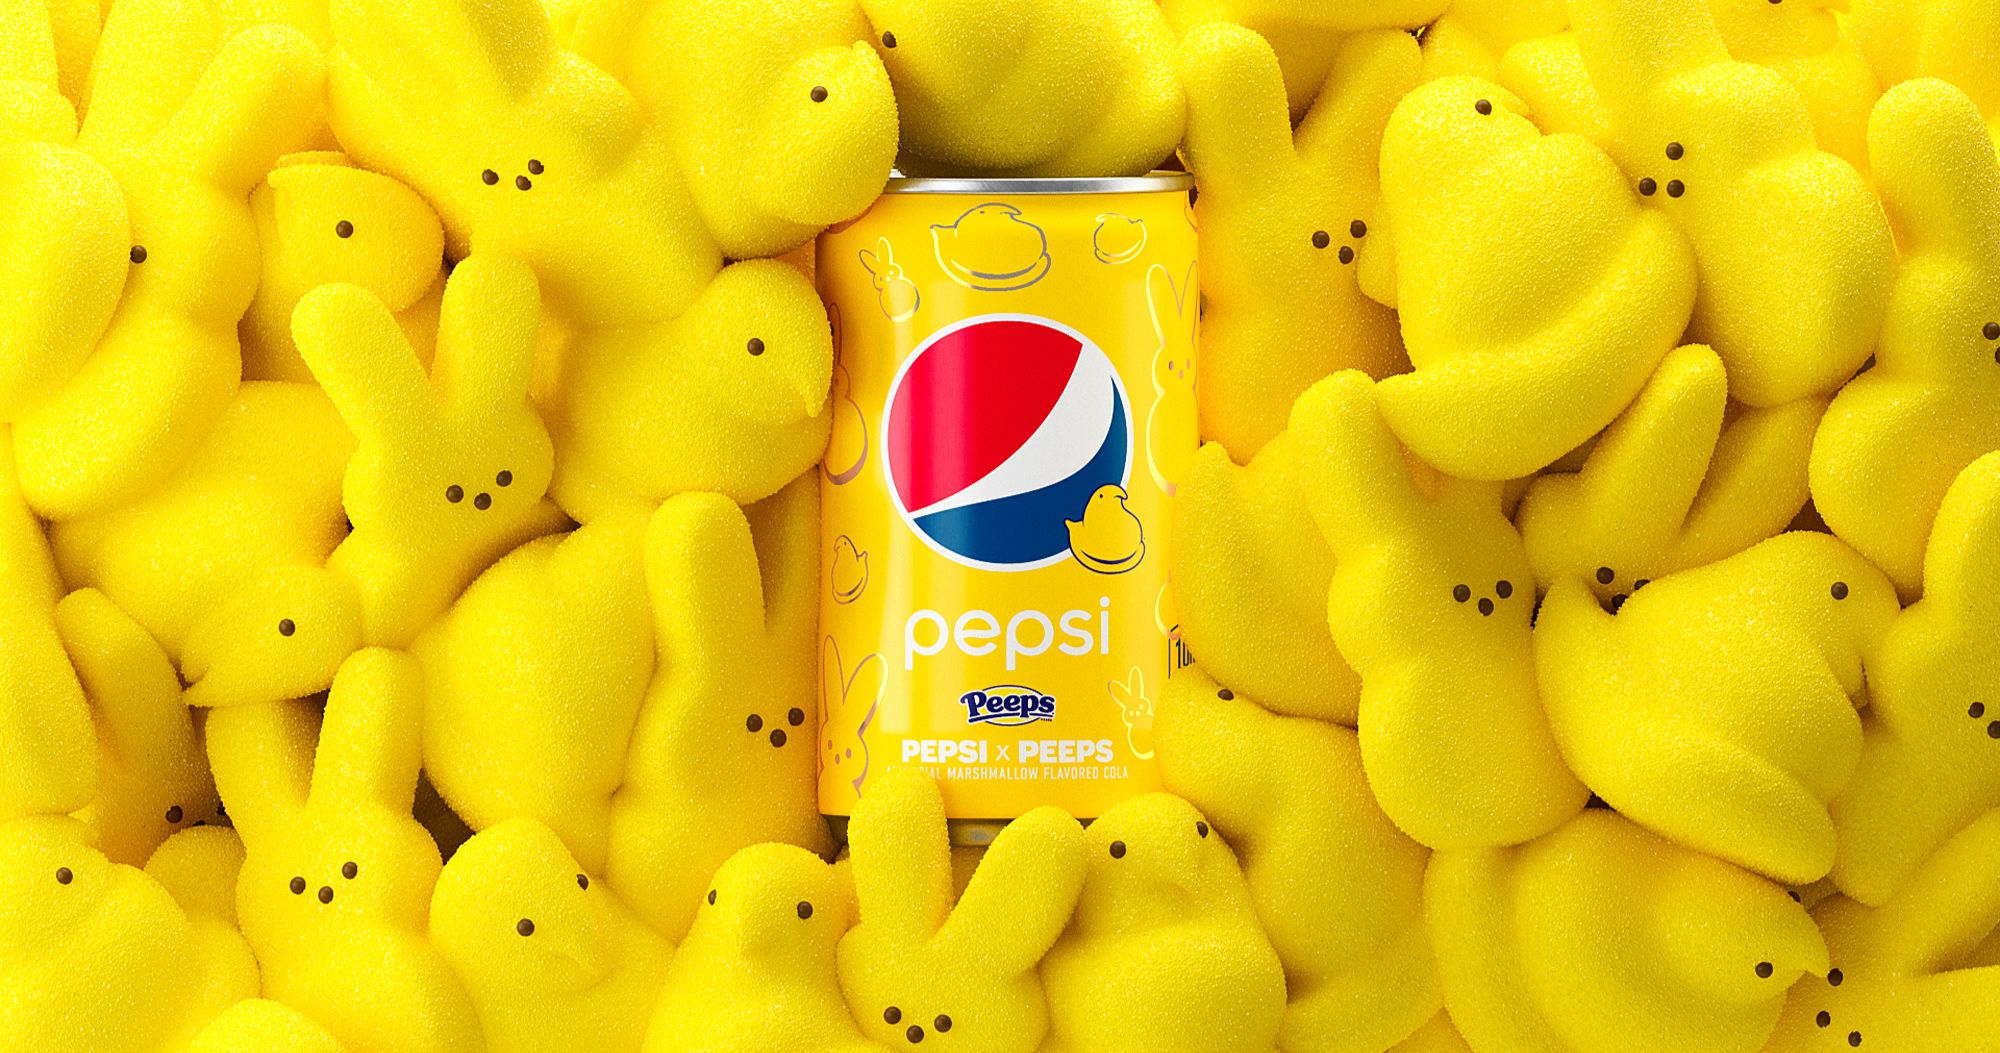 Pepsi and Peeps Unite for First-Ever Marshmallow Cola in Springtime Sweepstakes